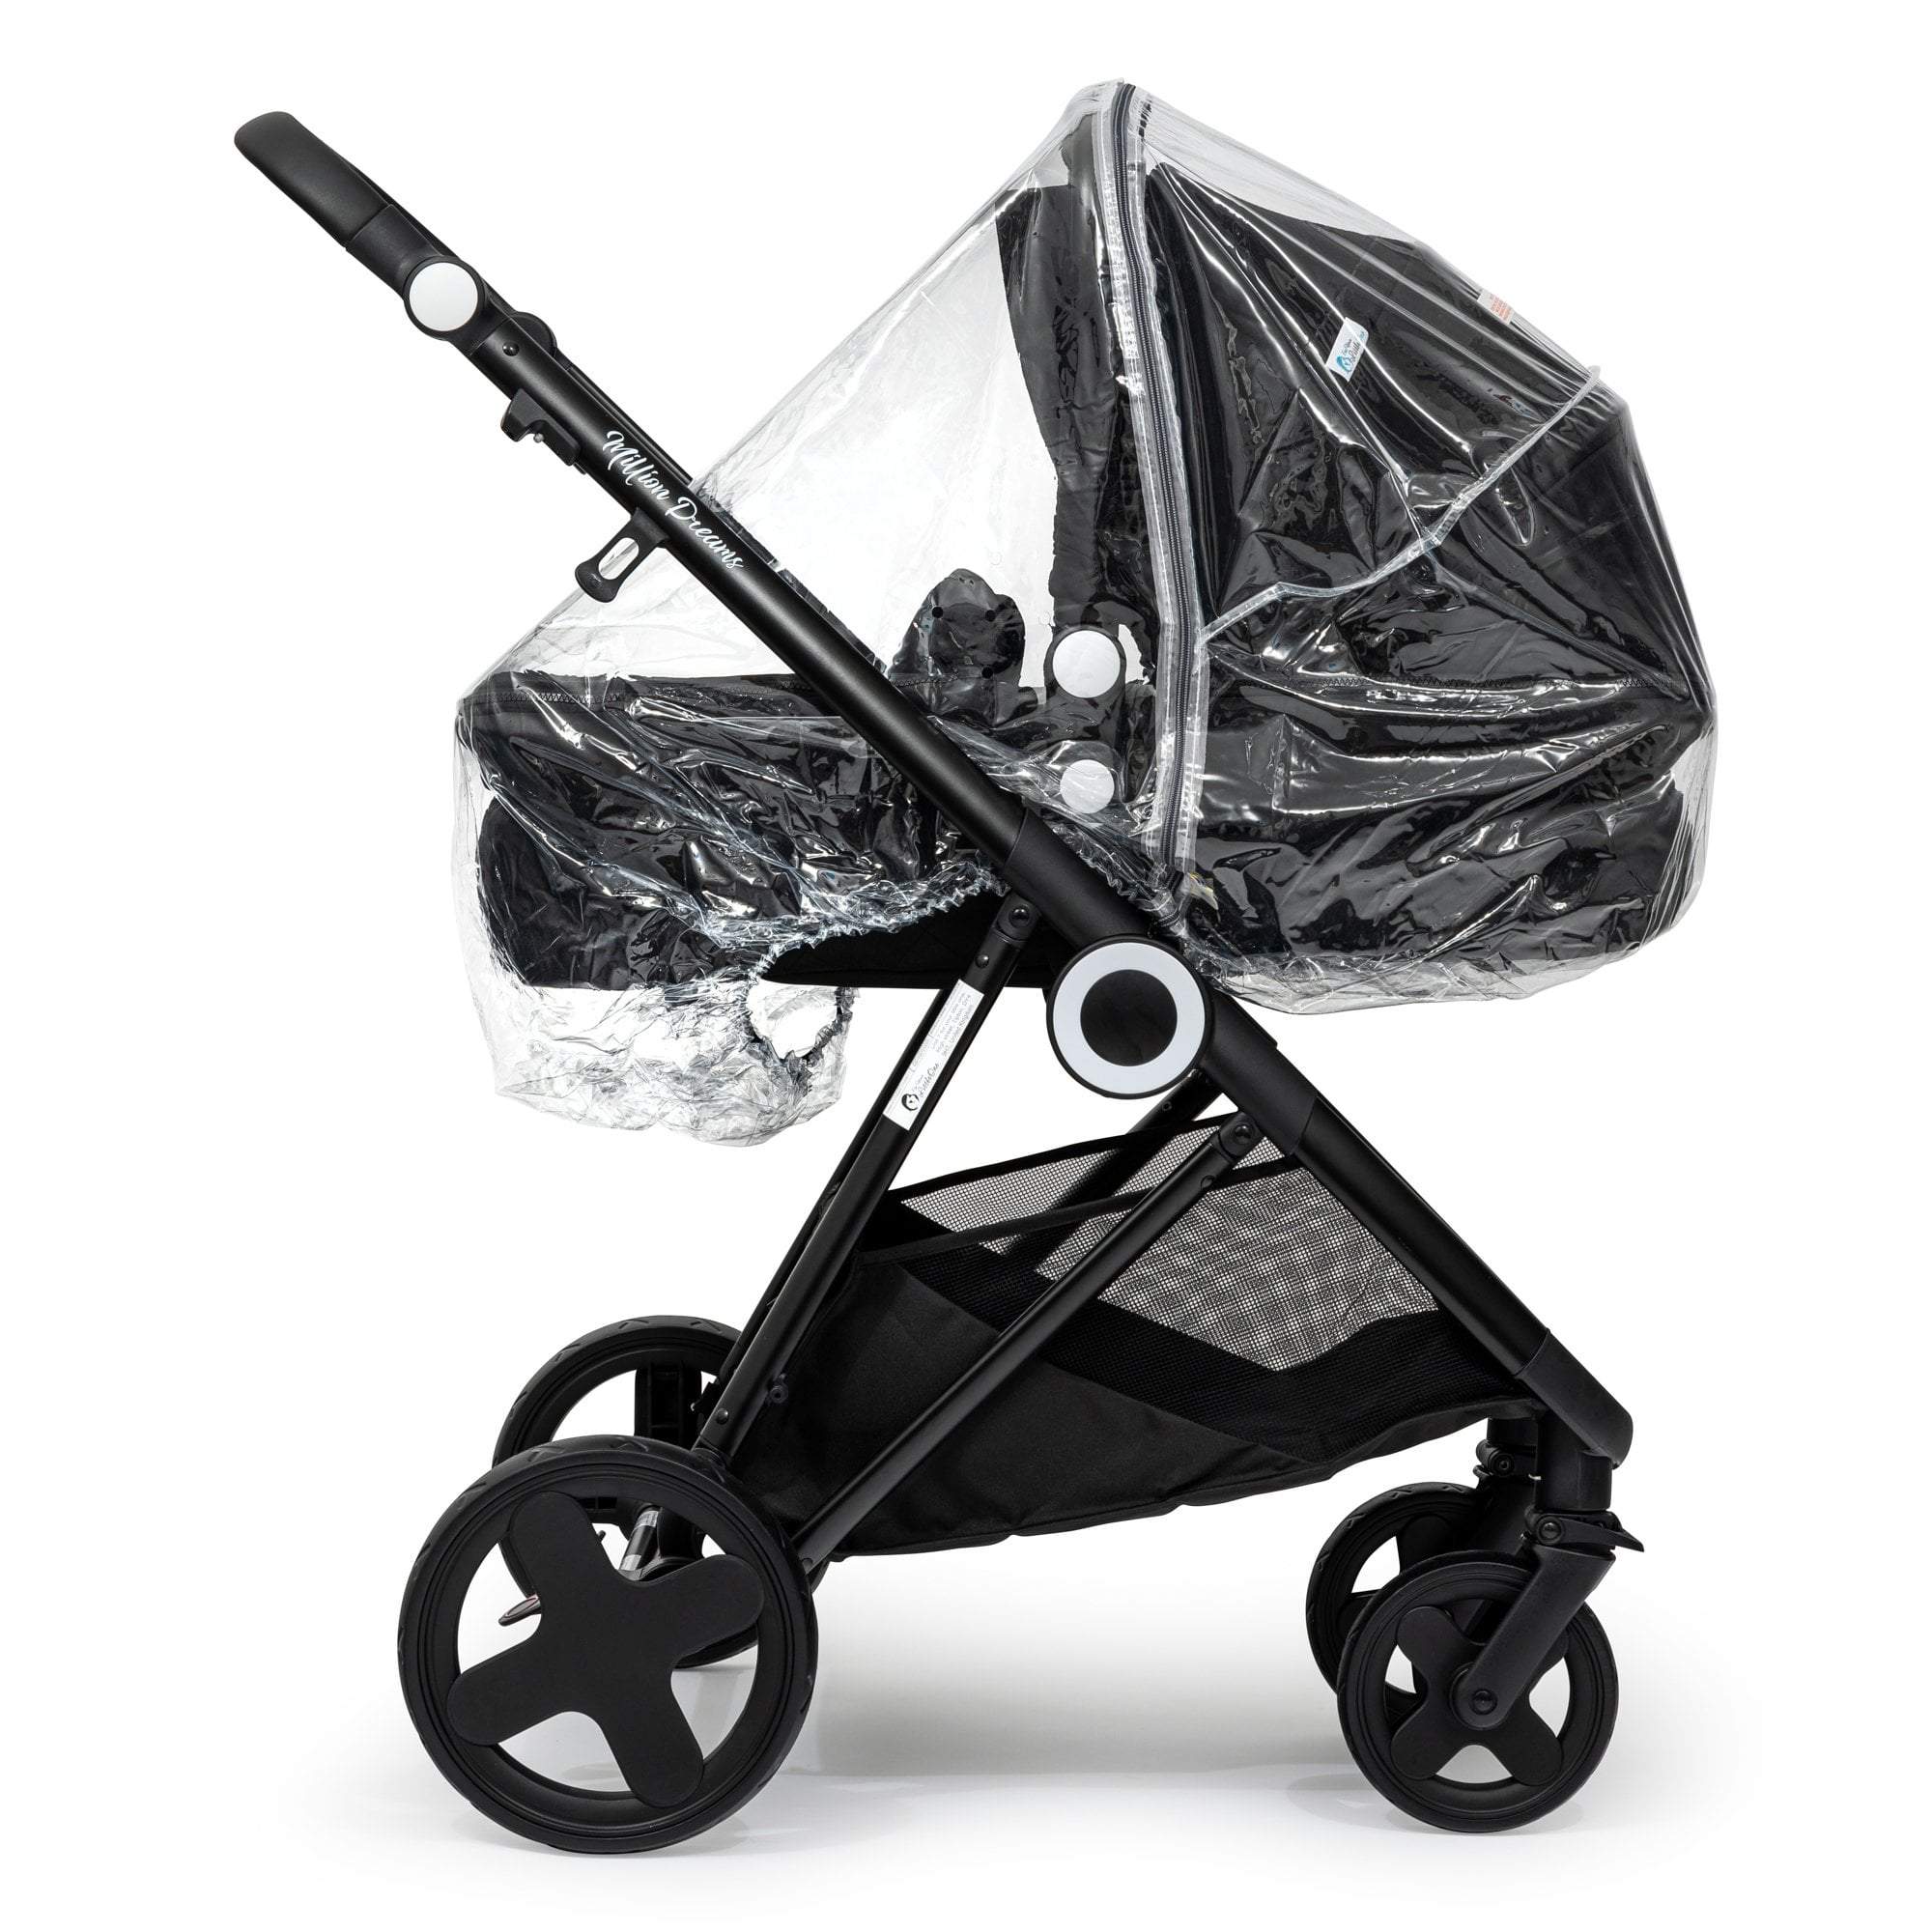 Carrycot Raincover Compatible With Koelstra - Fits All Models - For Your Little One